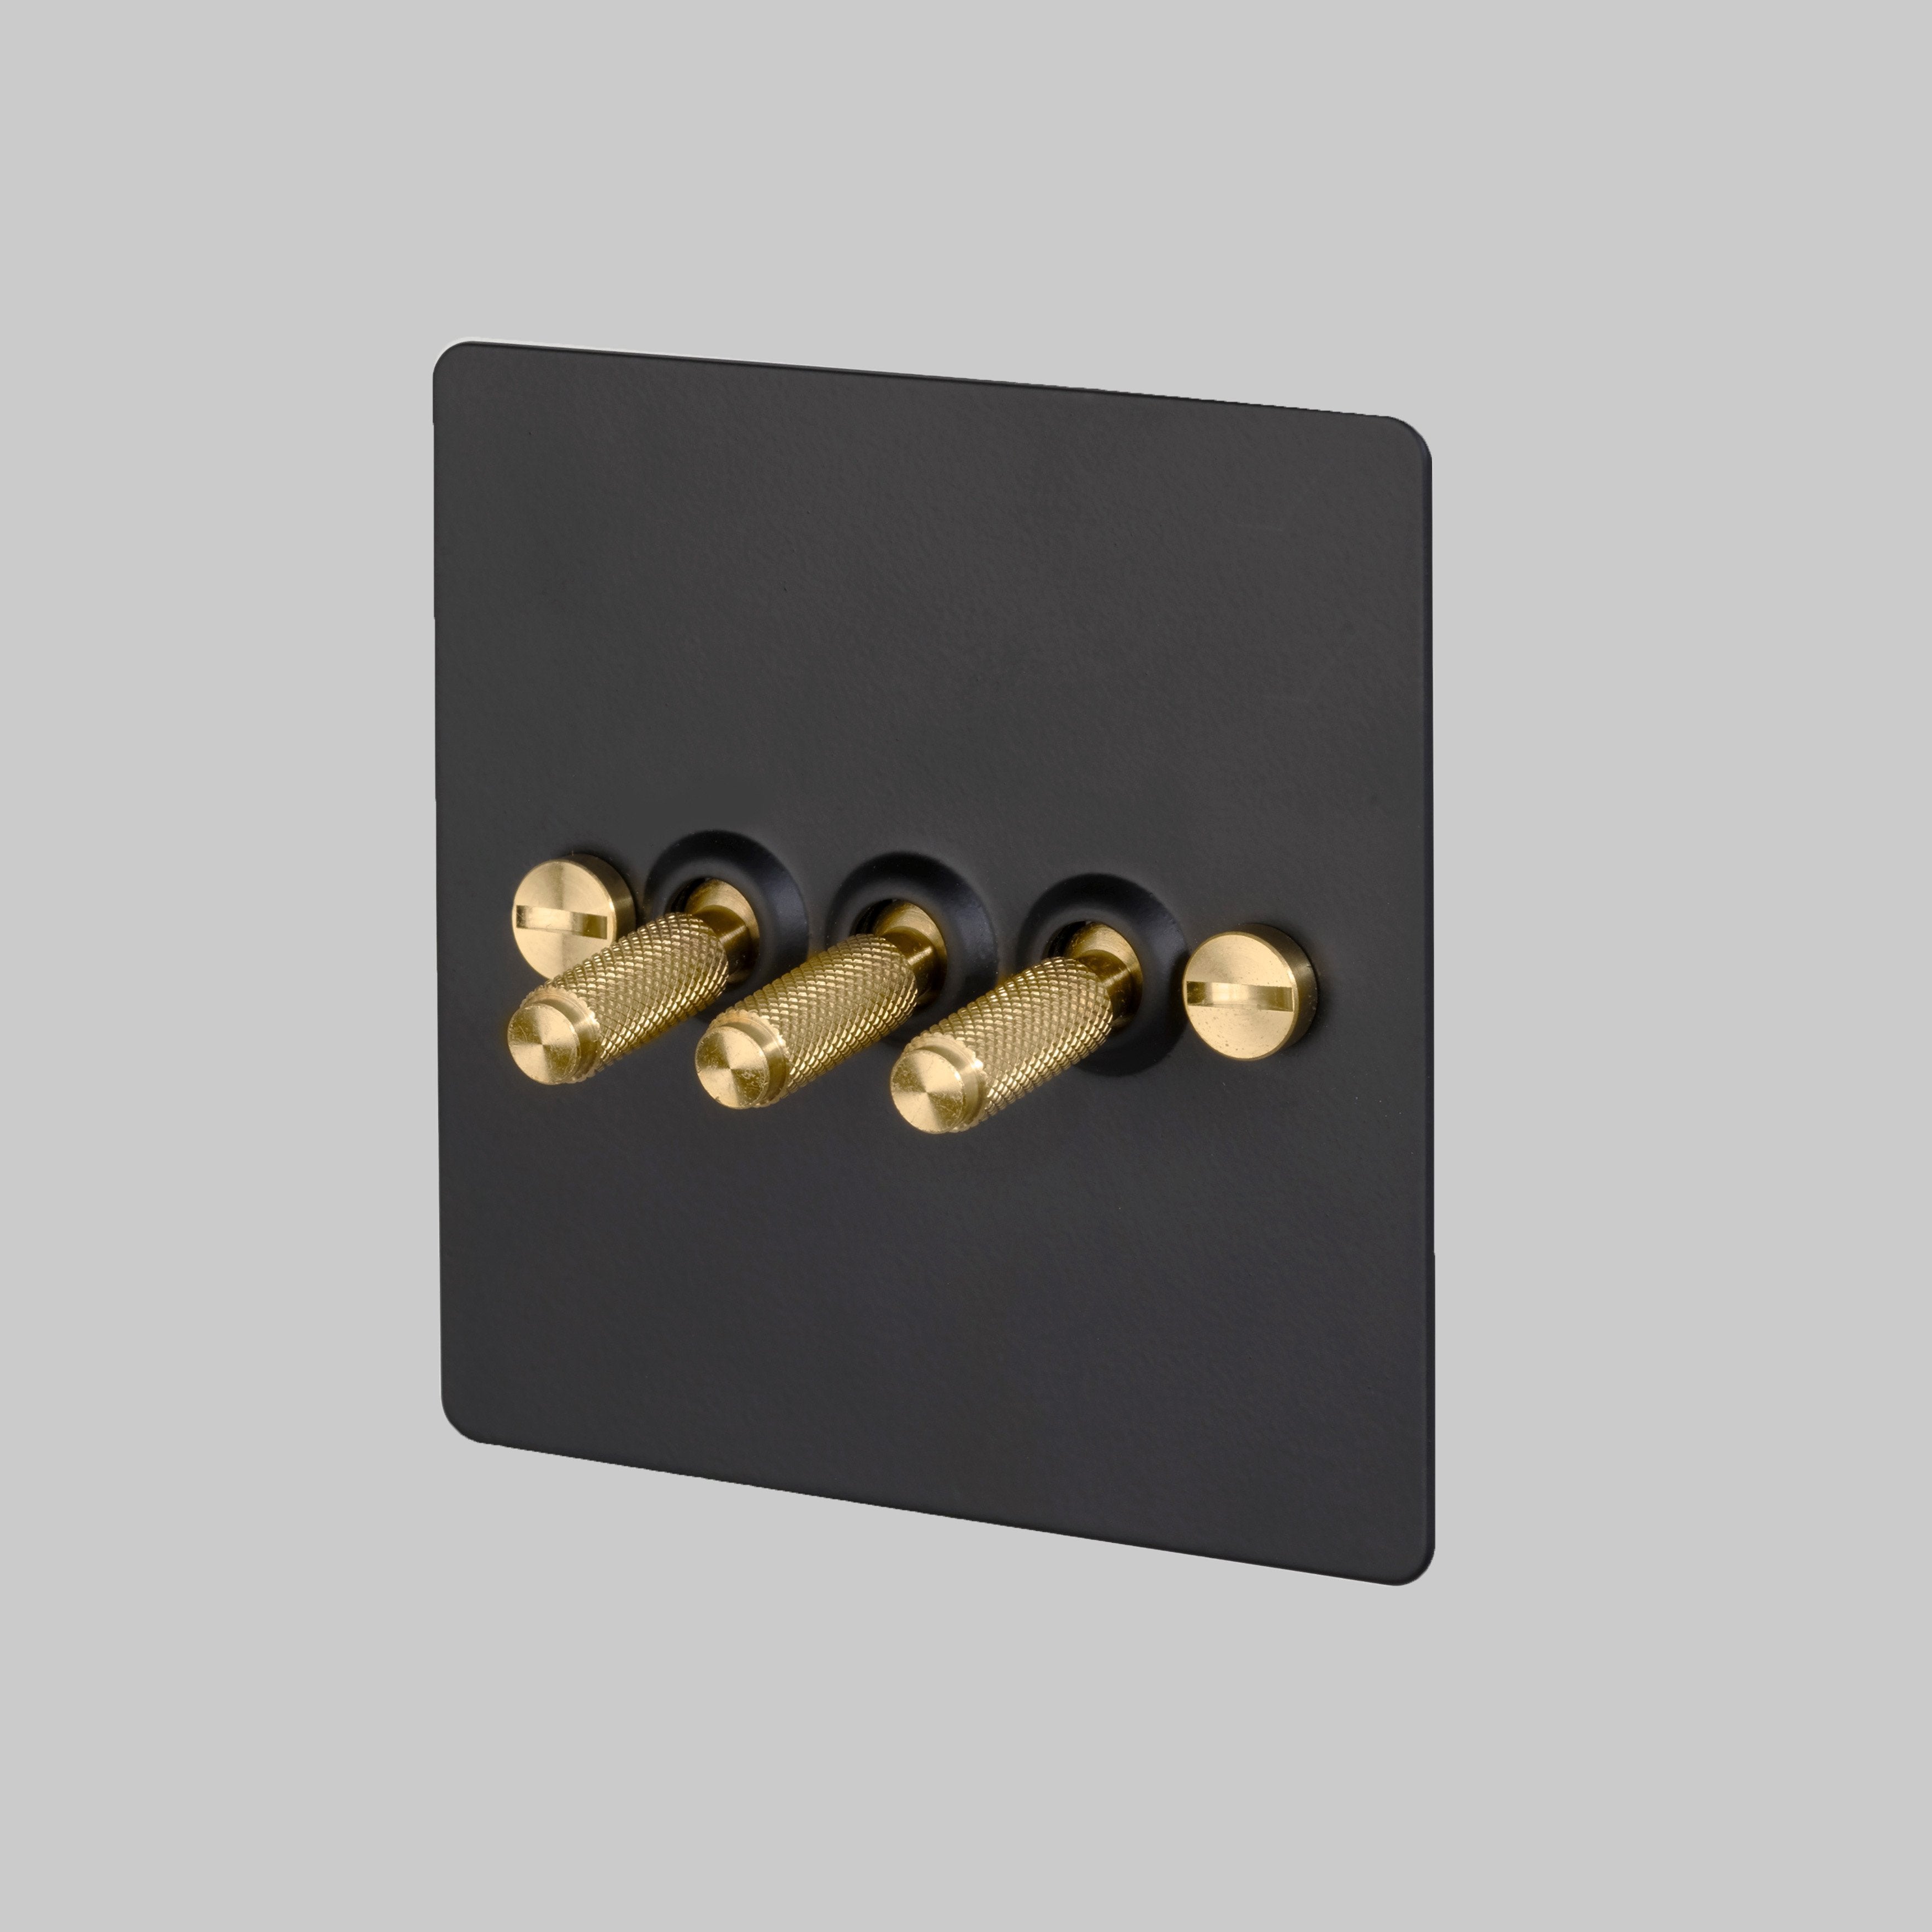 Buster and Punch 3G TOGGLE SWITCH / BLACK / BRASS